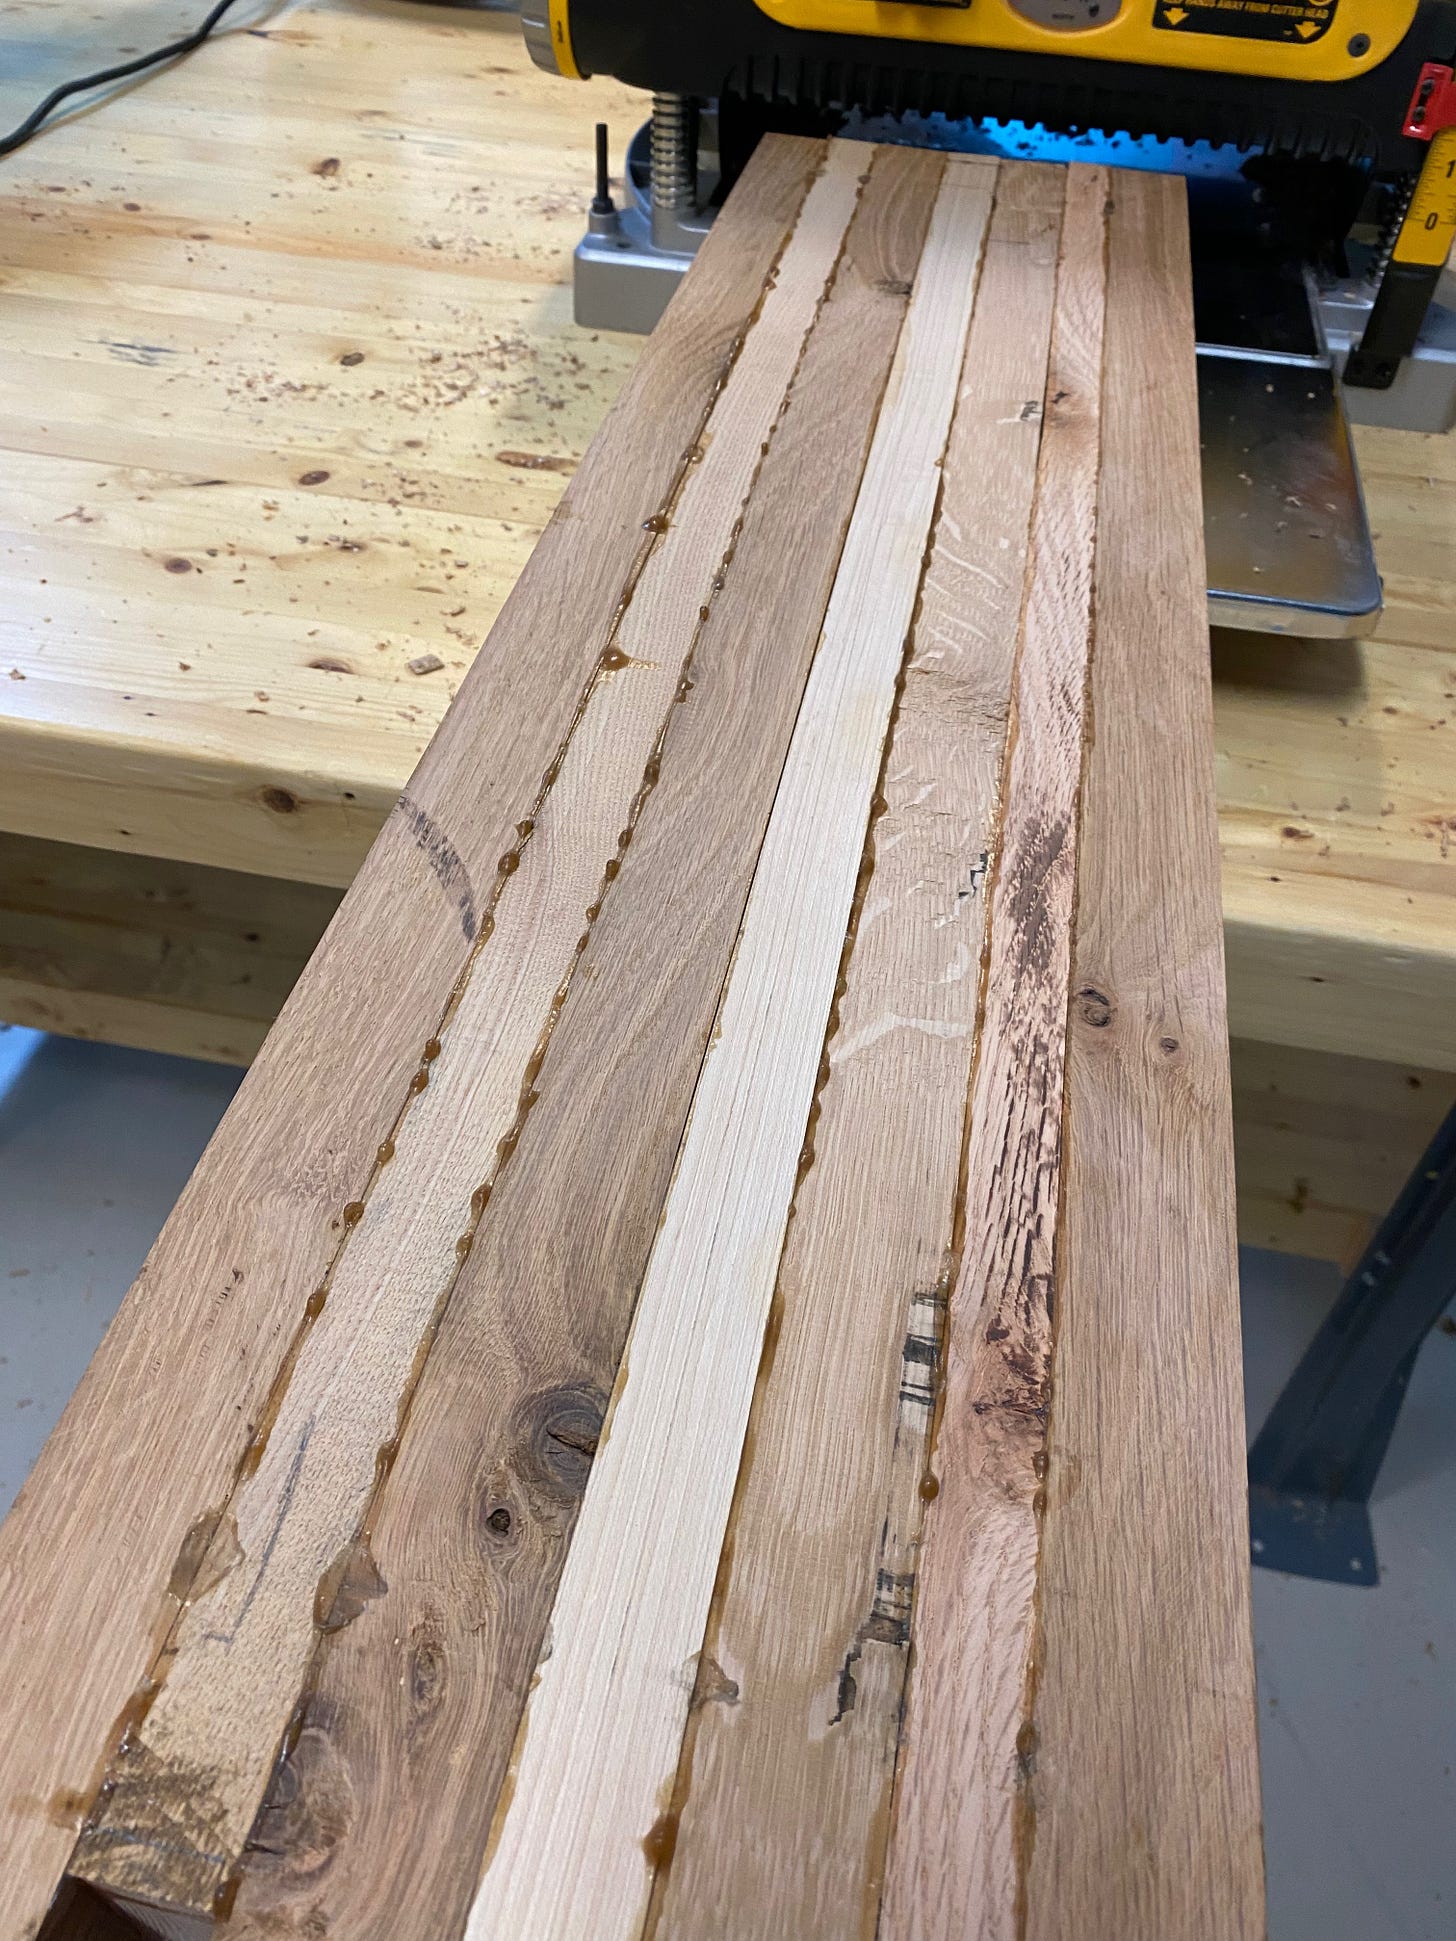 Planing a Glue-Up Piece